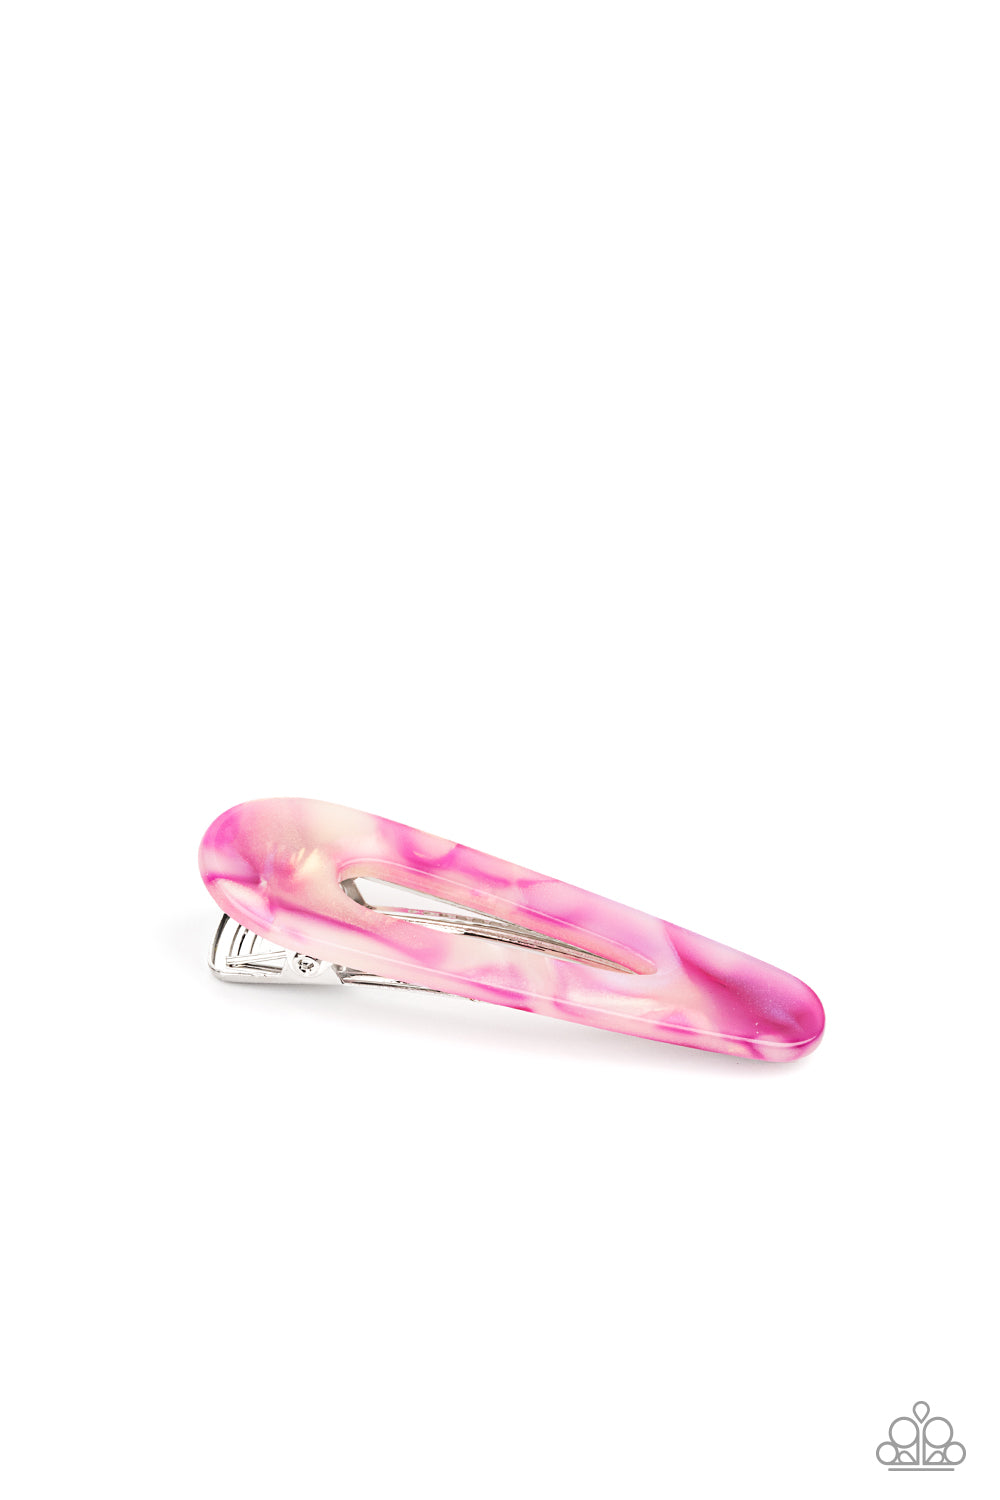 Walking on HAIR Pink Hair Clip - Paparazzi Accessories. Featuring a shell-like iridescence, a pink frame pulls back the hair for a colorful retro look. Features a standard hair clip on the back.  All Paparazzi Accessories are lead free and nickel free!  Sold as one pair of hair clips.